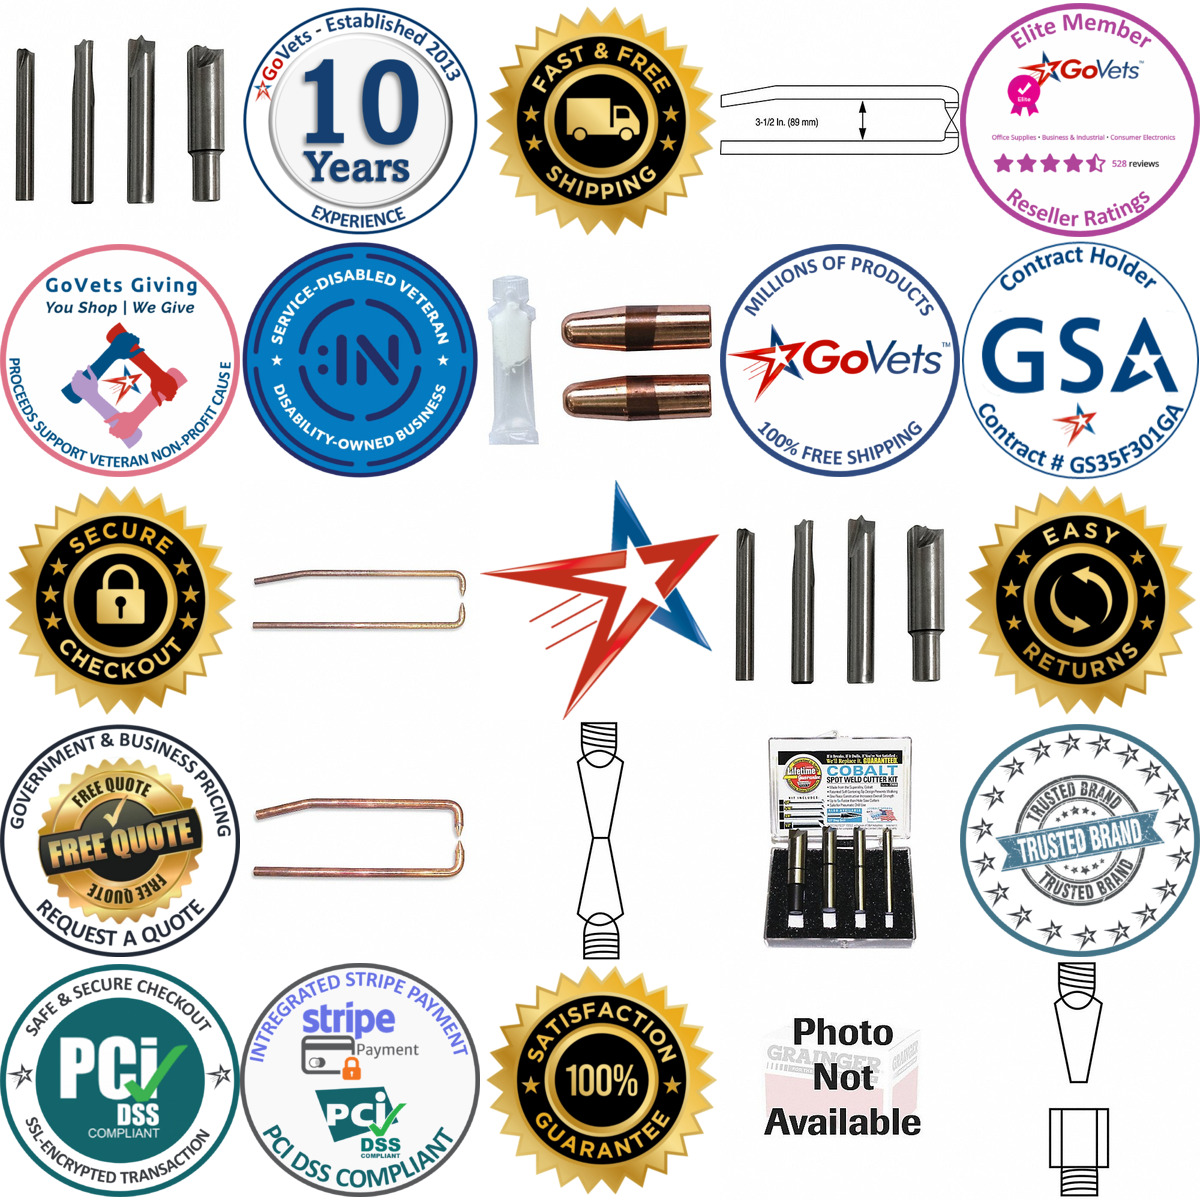 A selection of Spot Welding and Accessories products on GoVets